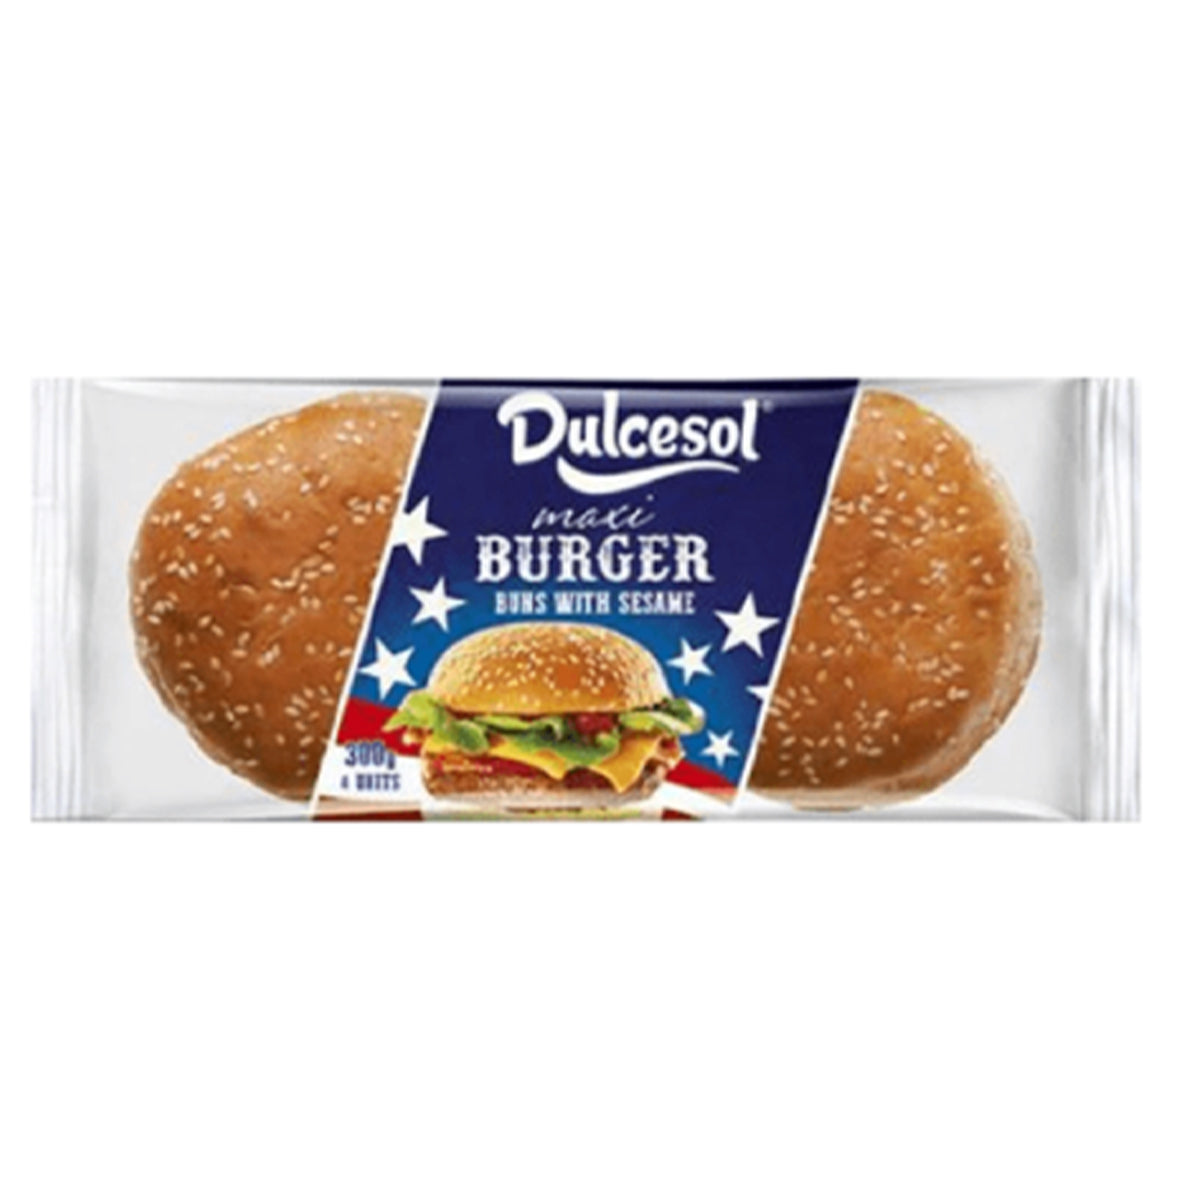 Dulcesol - Maxi Burger Buns with Sasame - 300g burger with american flag on a white background.